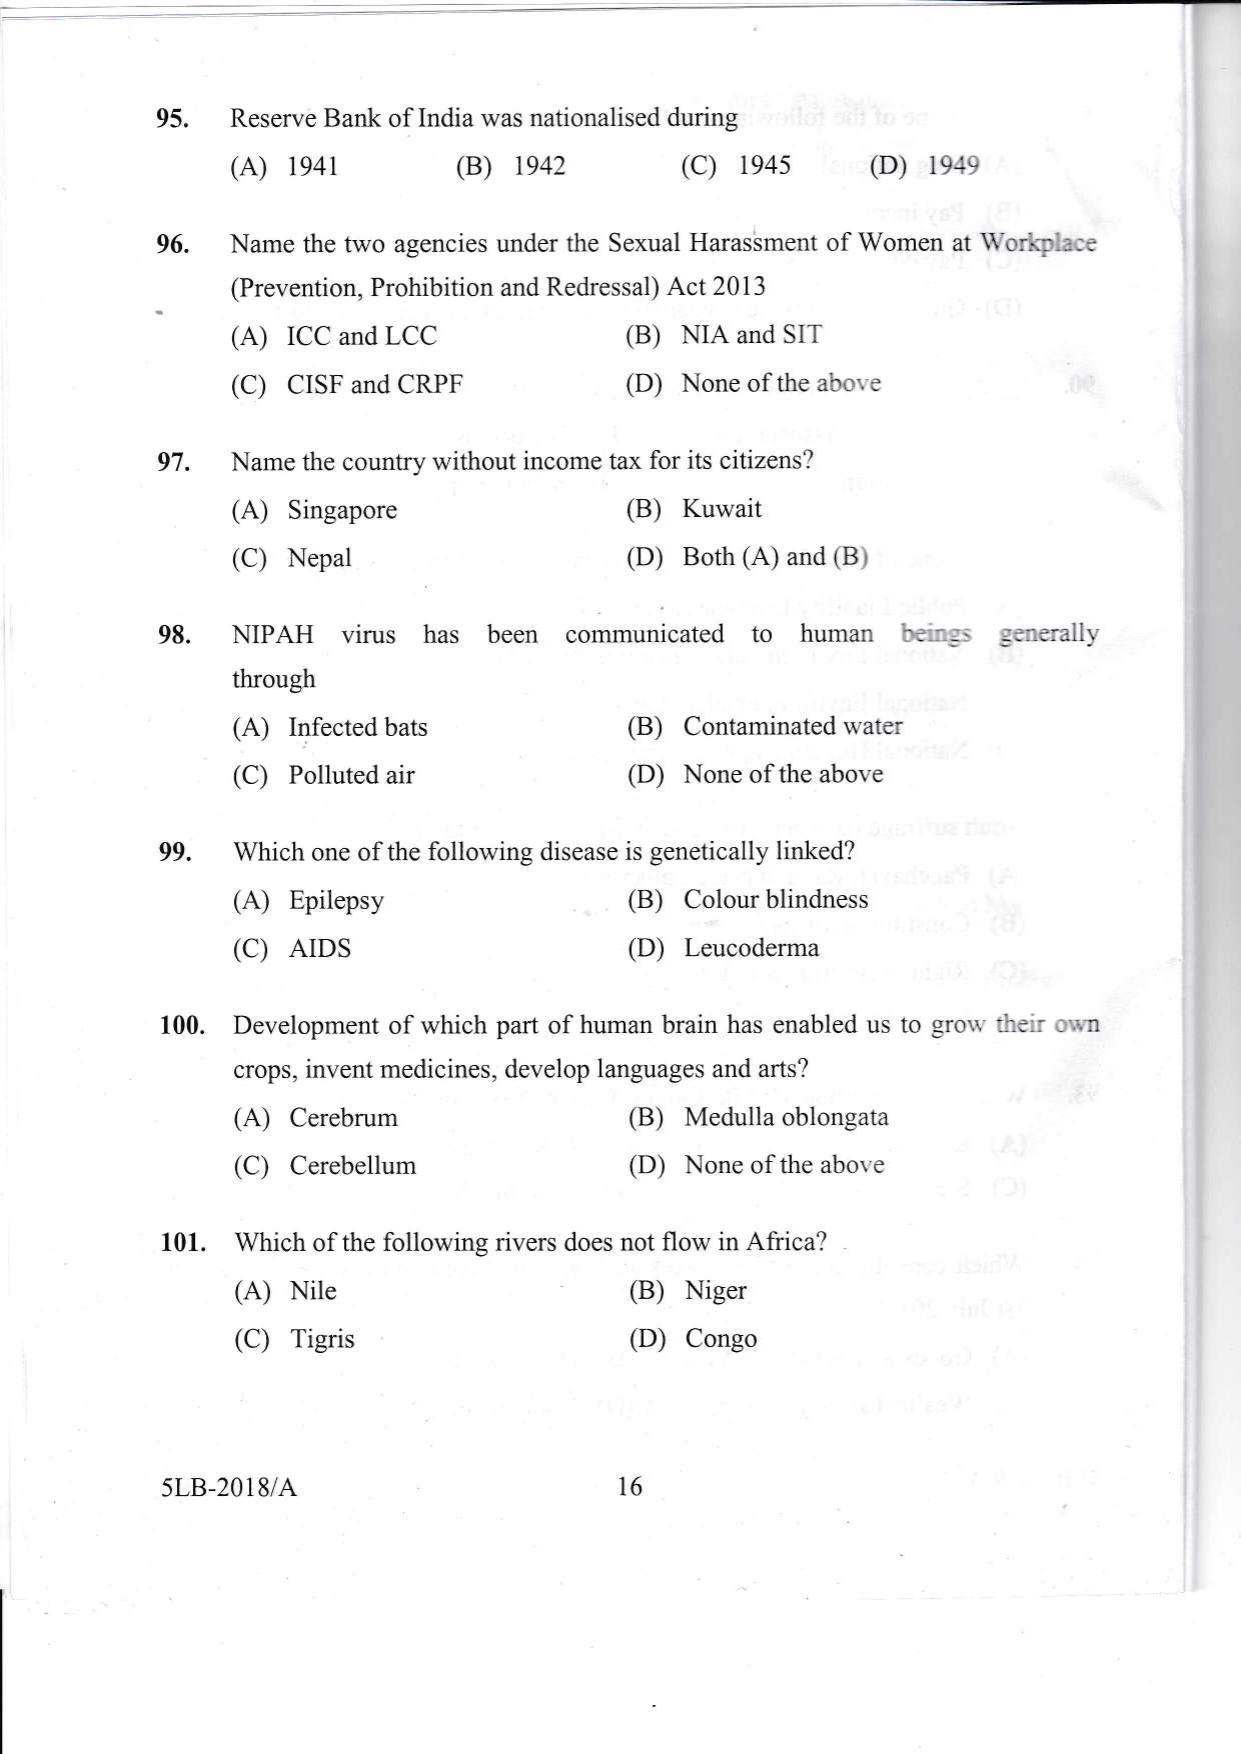 KLEE 5 Year LLB Exam 2018 Question Paper - Page 16